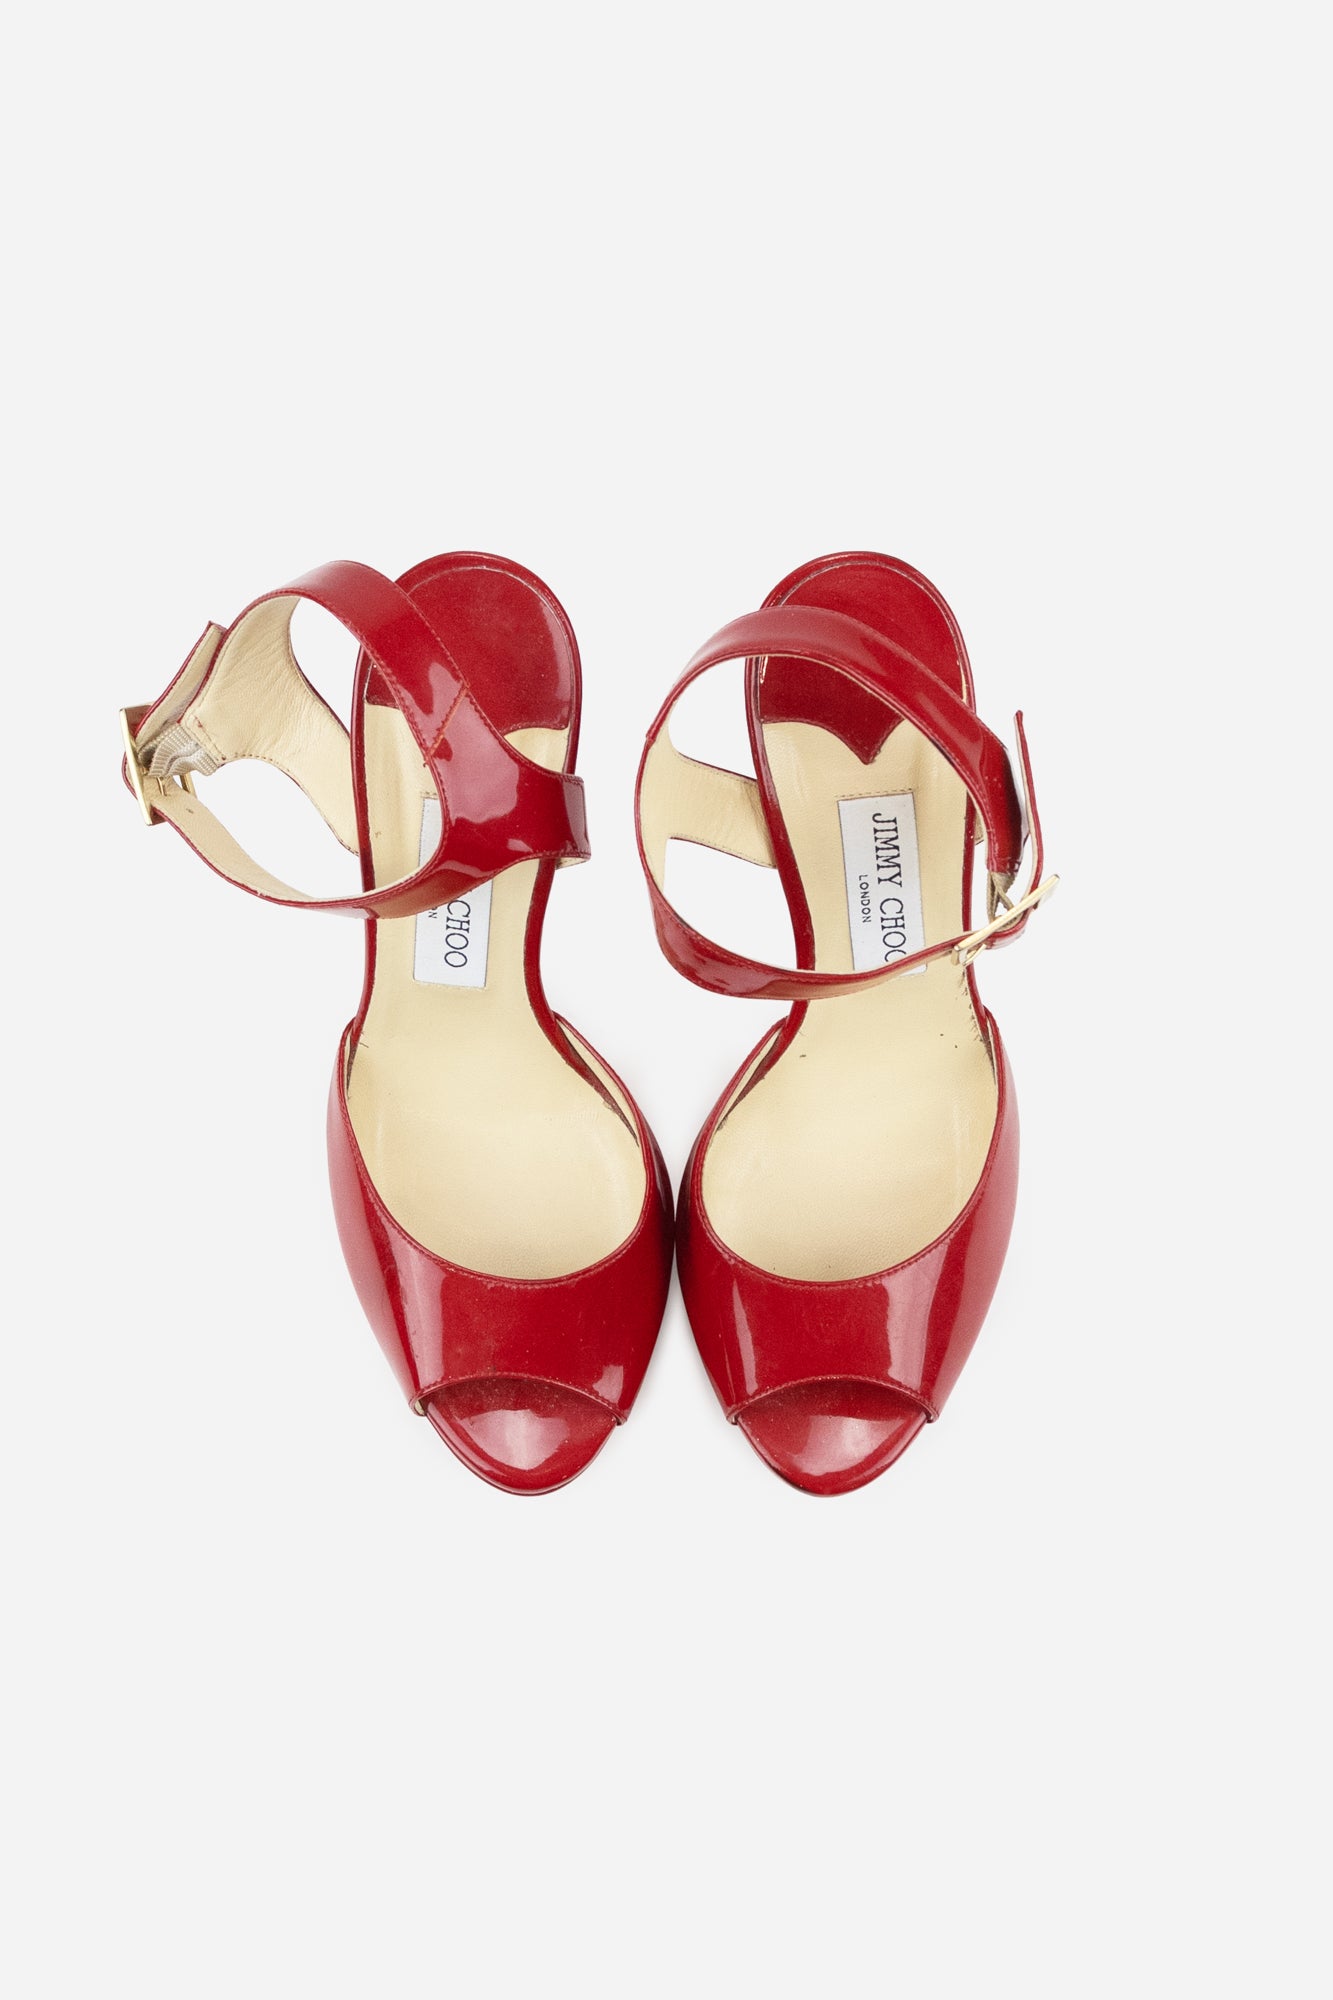 Red Patent Leather Platform Sandals - So Over It Luxury Consignment